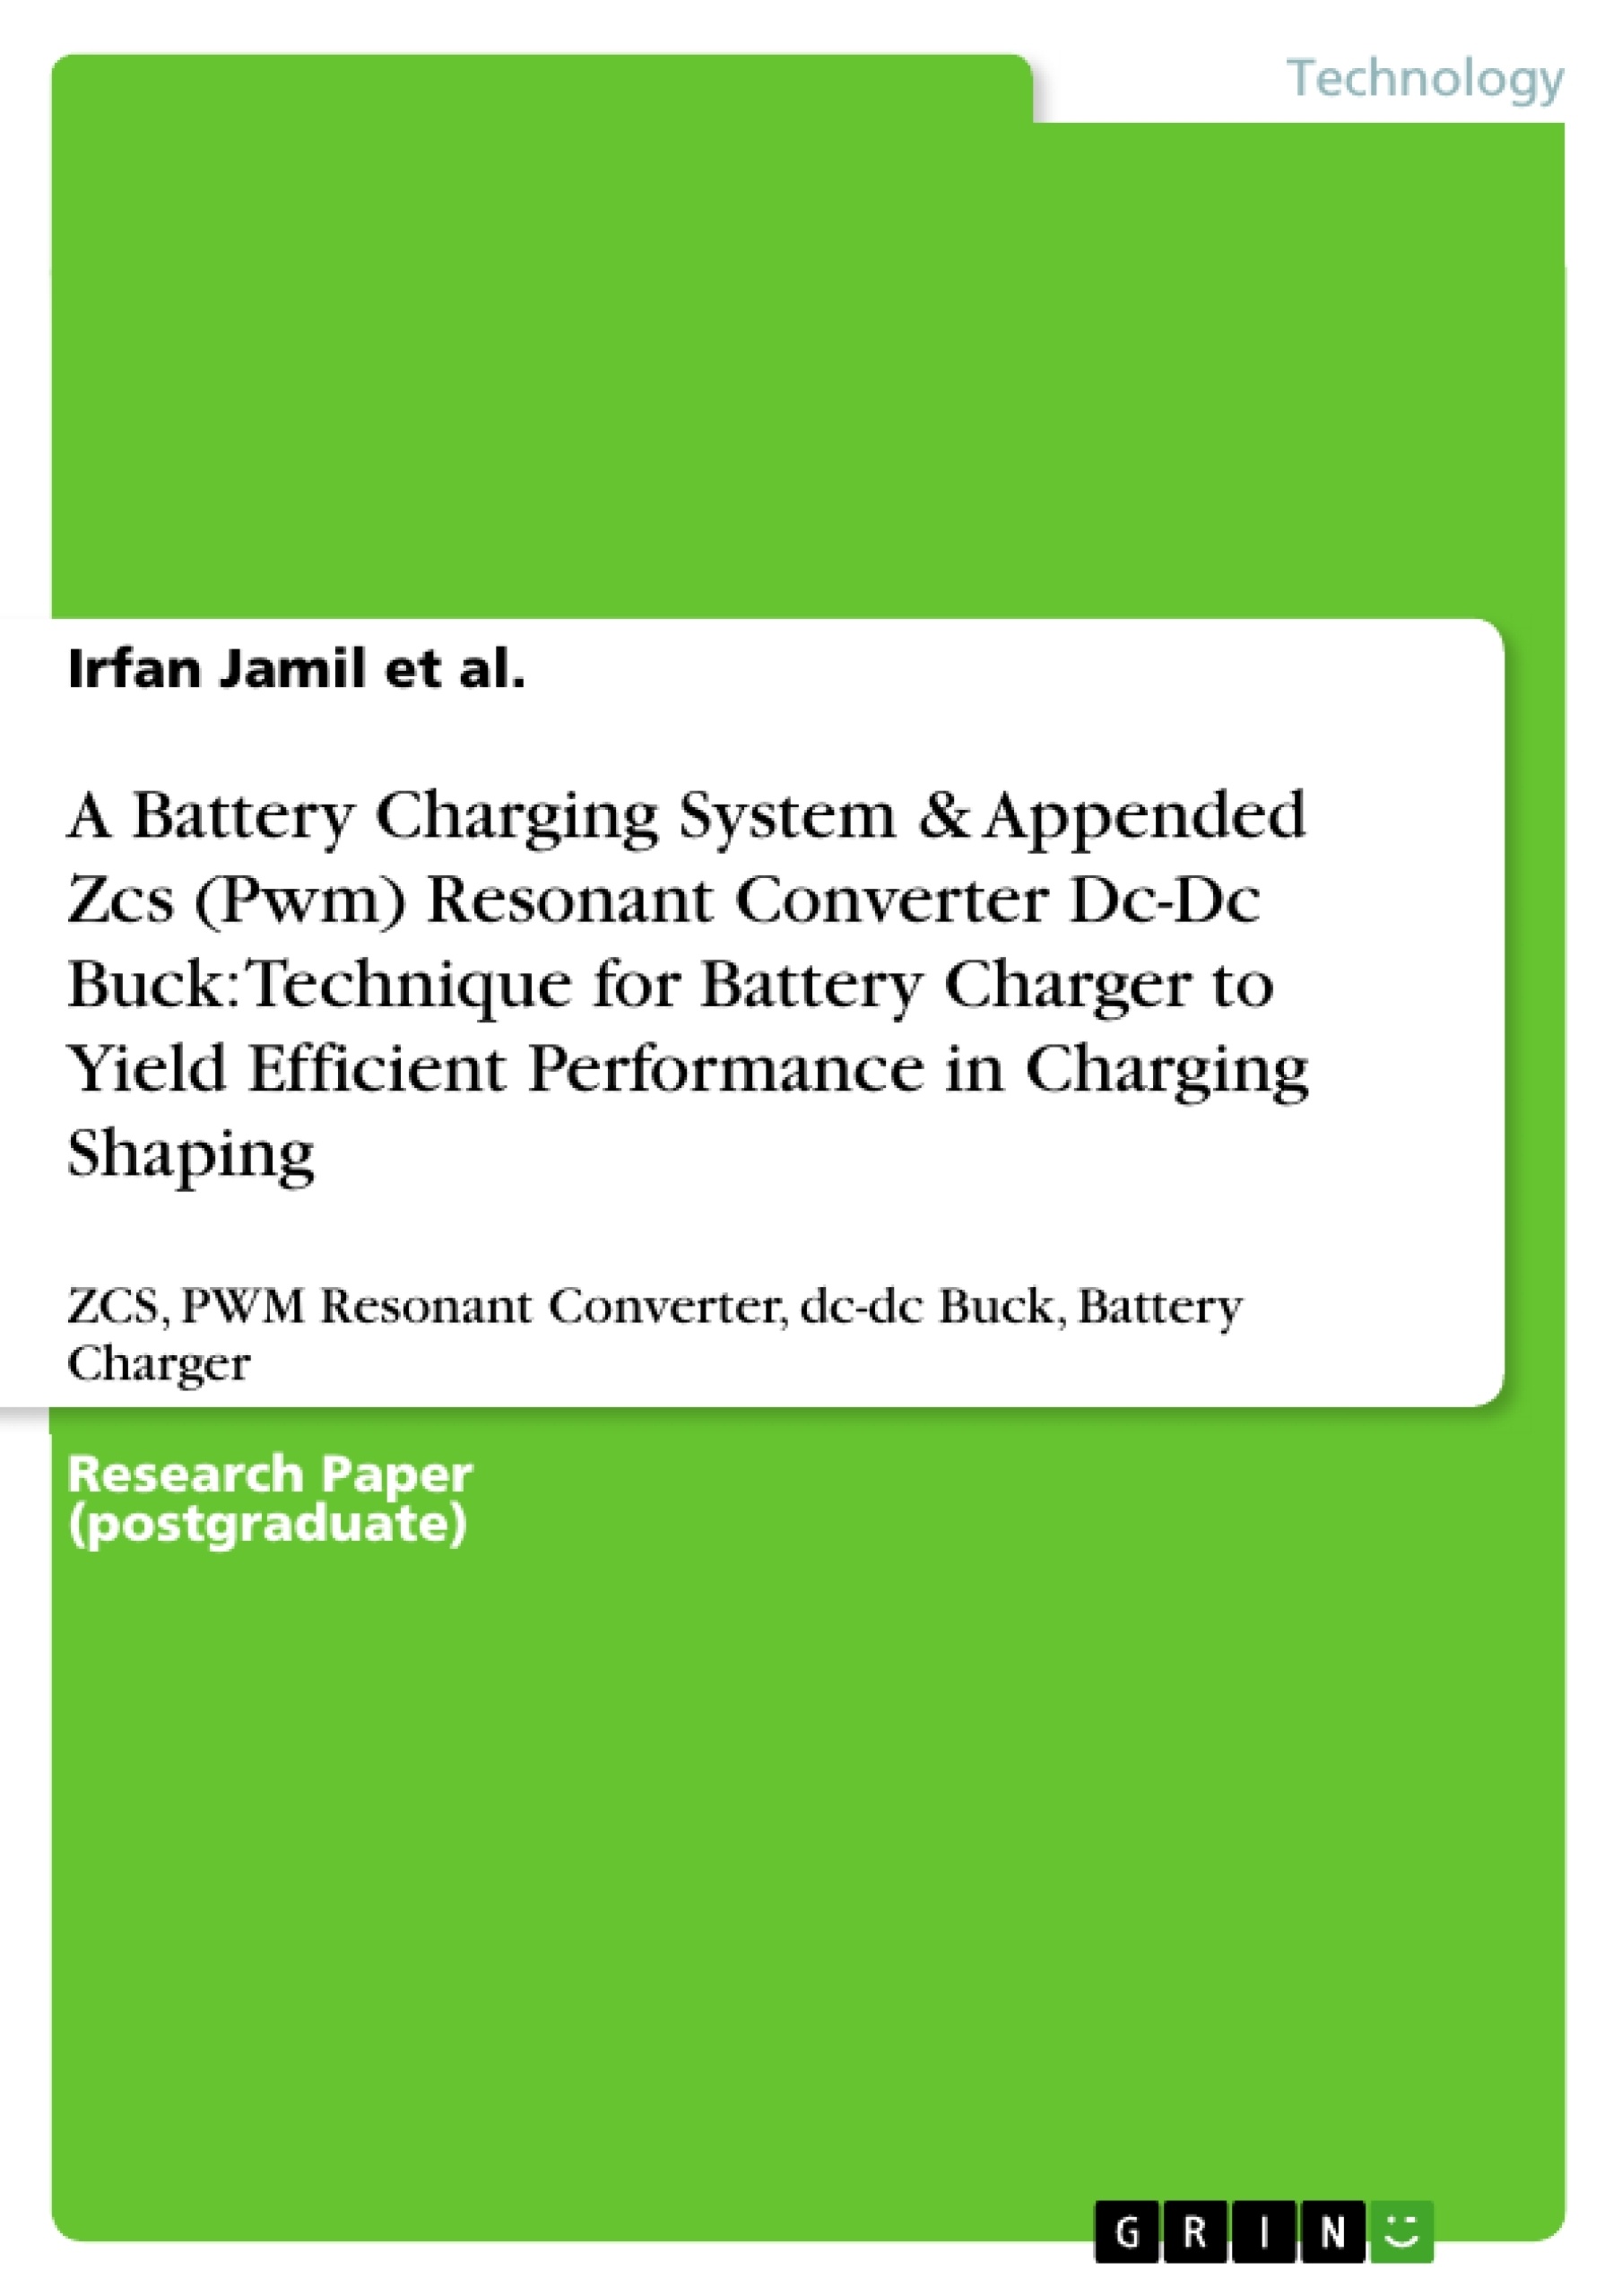 Title: A Battery Charging System & Appended Zcs (Pwm) Resonant Converter Dc-Dc Buck: Technique for Battery Charger to Yield Efficient Performance in Charging Shaping